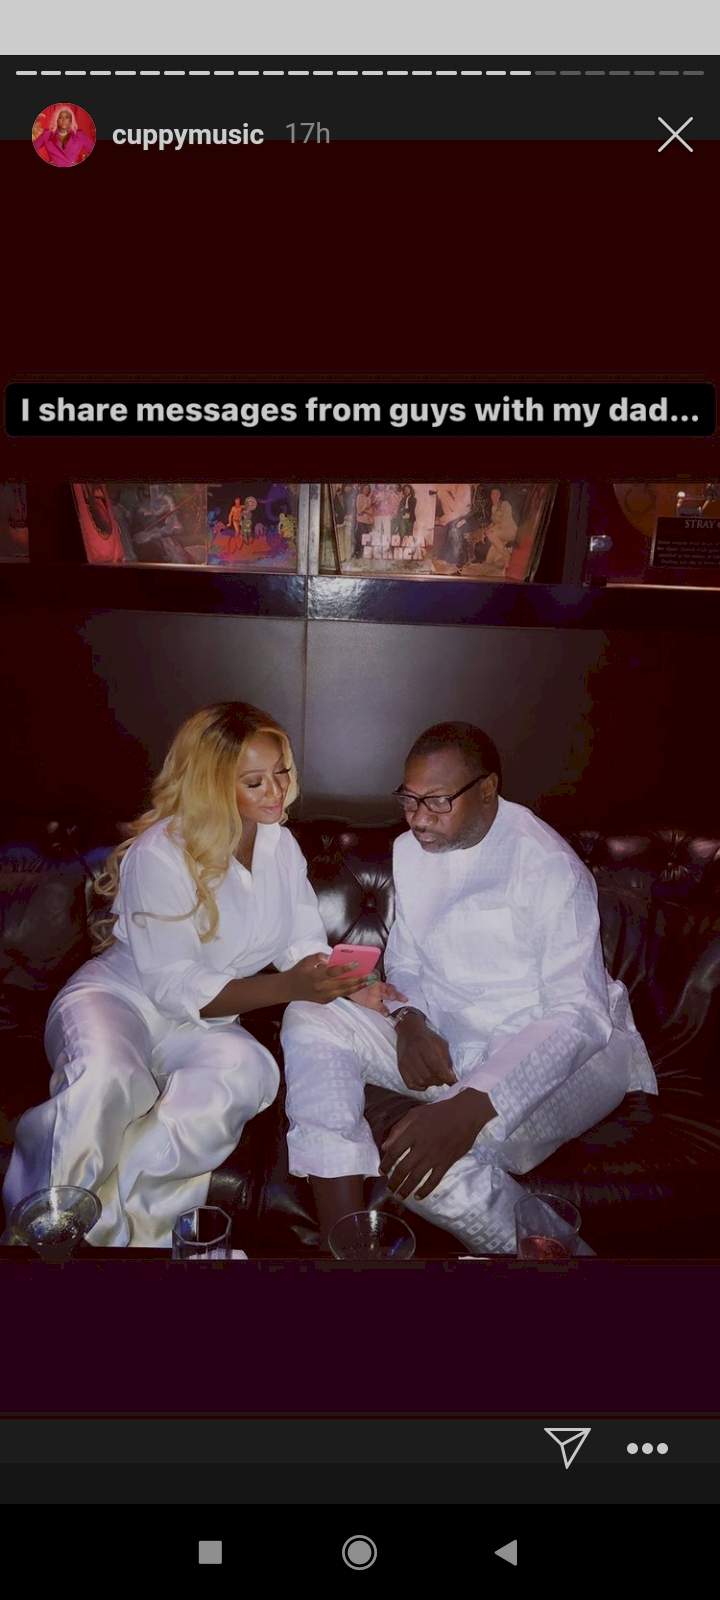 'I beg for money from my dad' - DJ Cuppy list things she does with Femi Otedola (Photo)